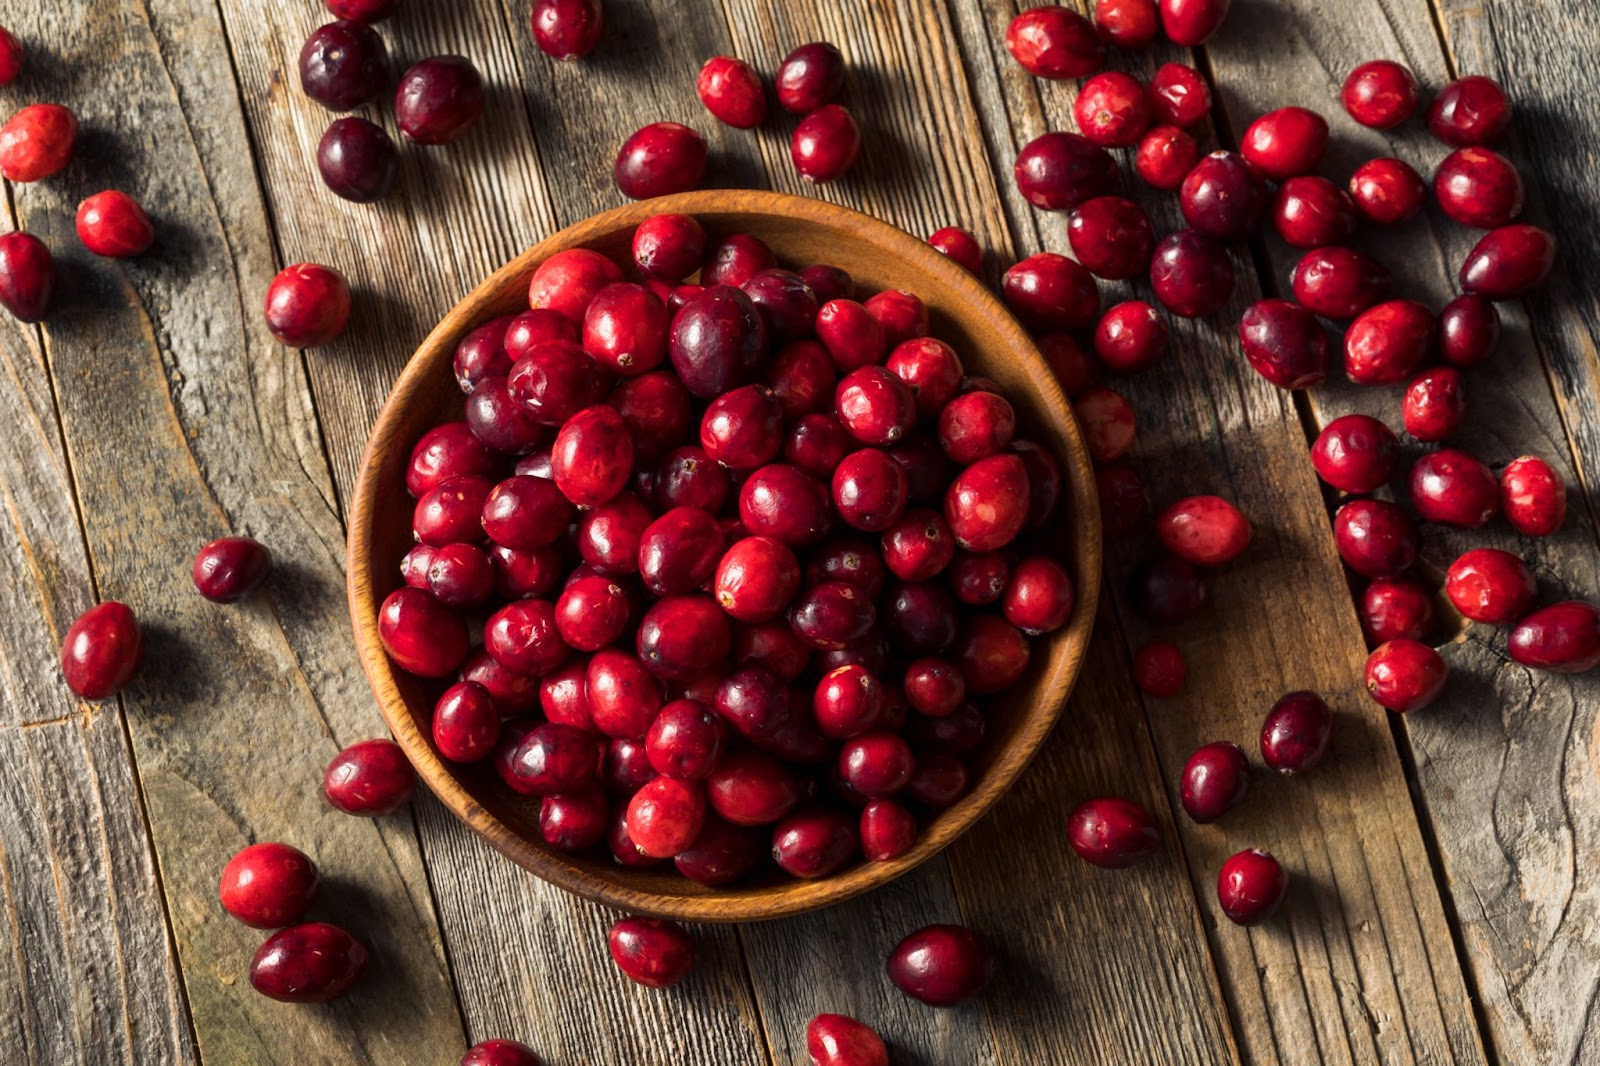 Red, full, ripe cranberries in a wooden bowl.